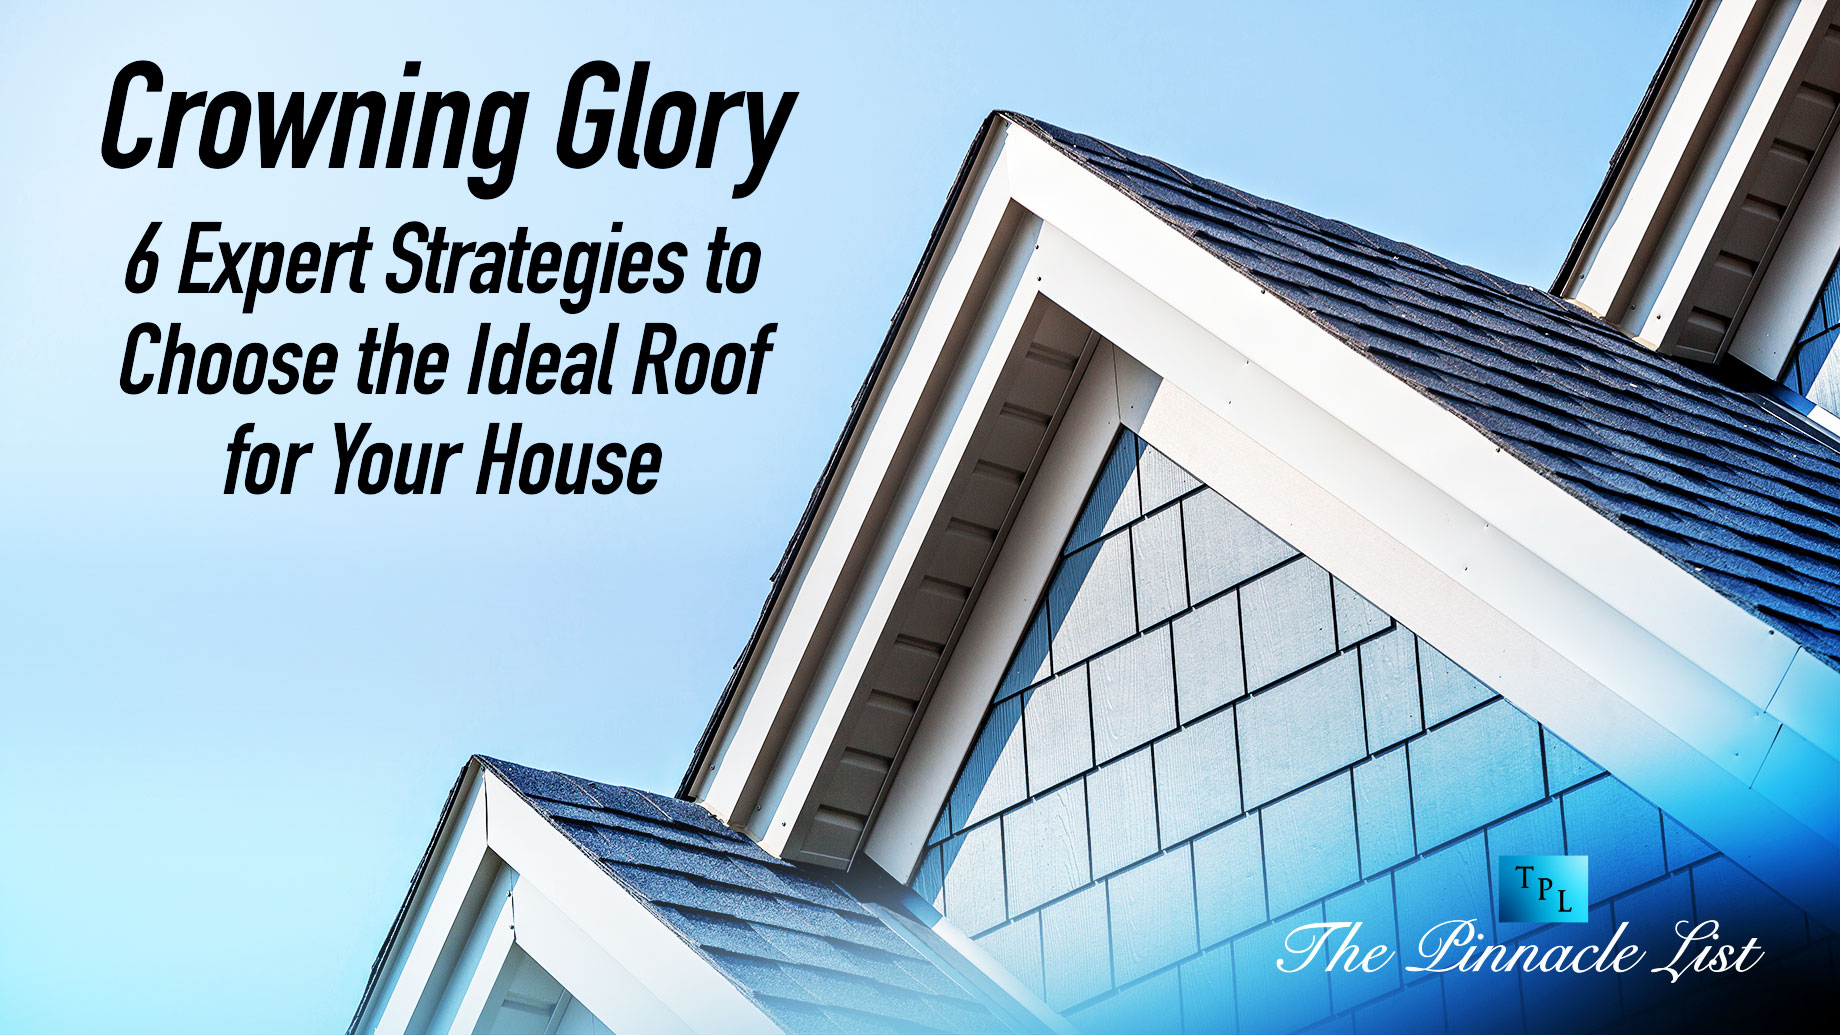 Crowning Glory: 6 Expert Strategies to Choose the Ideal Roof for Your House